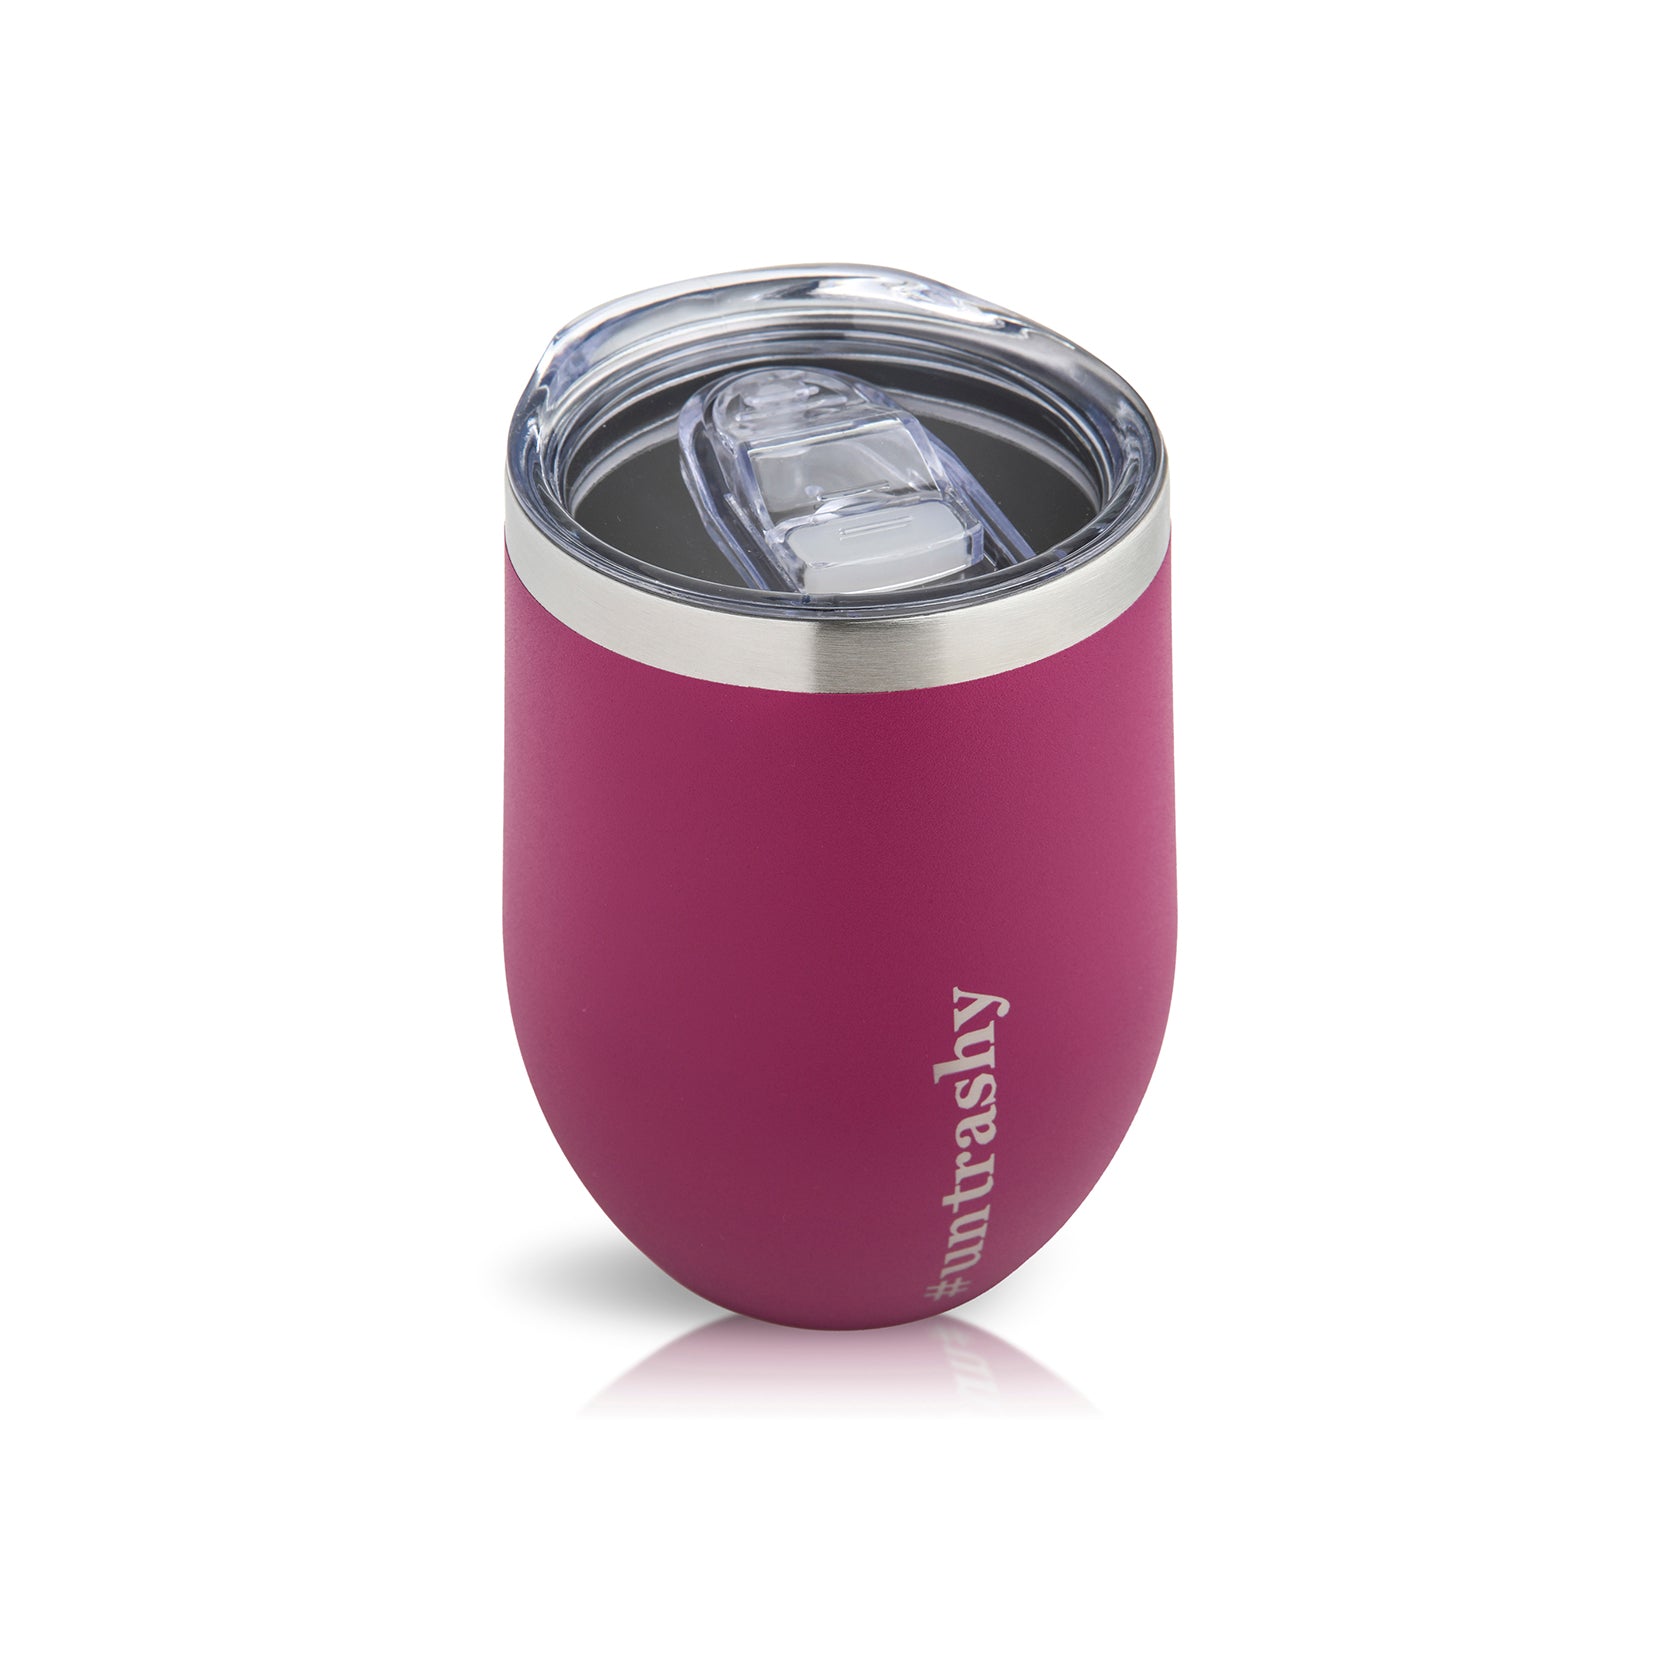 Magenta coloured coffe or wine cup with lid on a white background